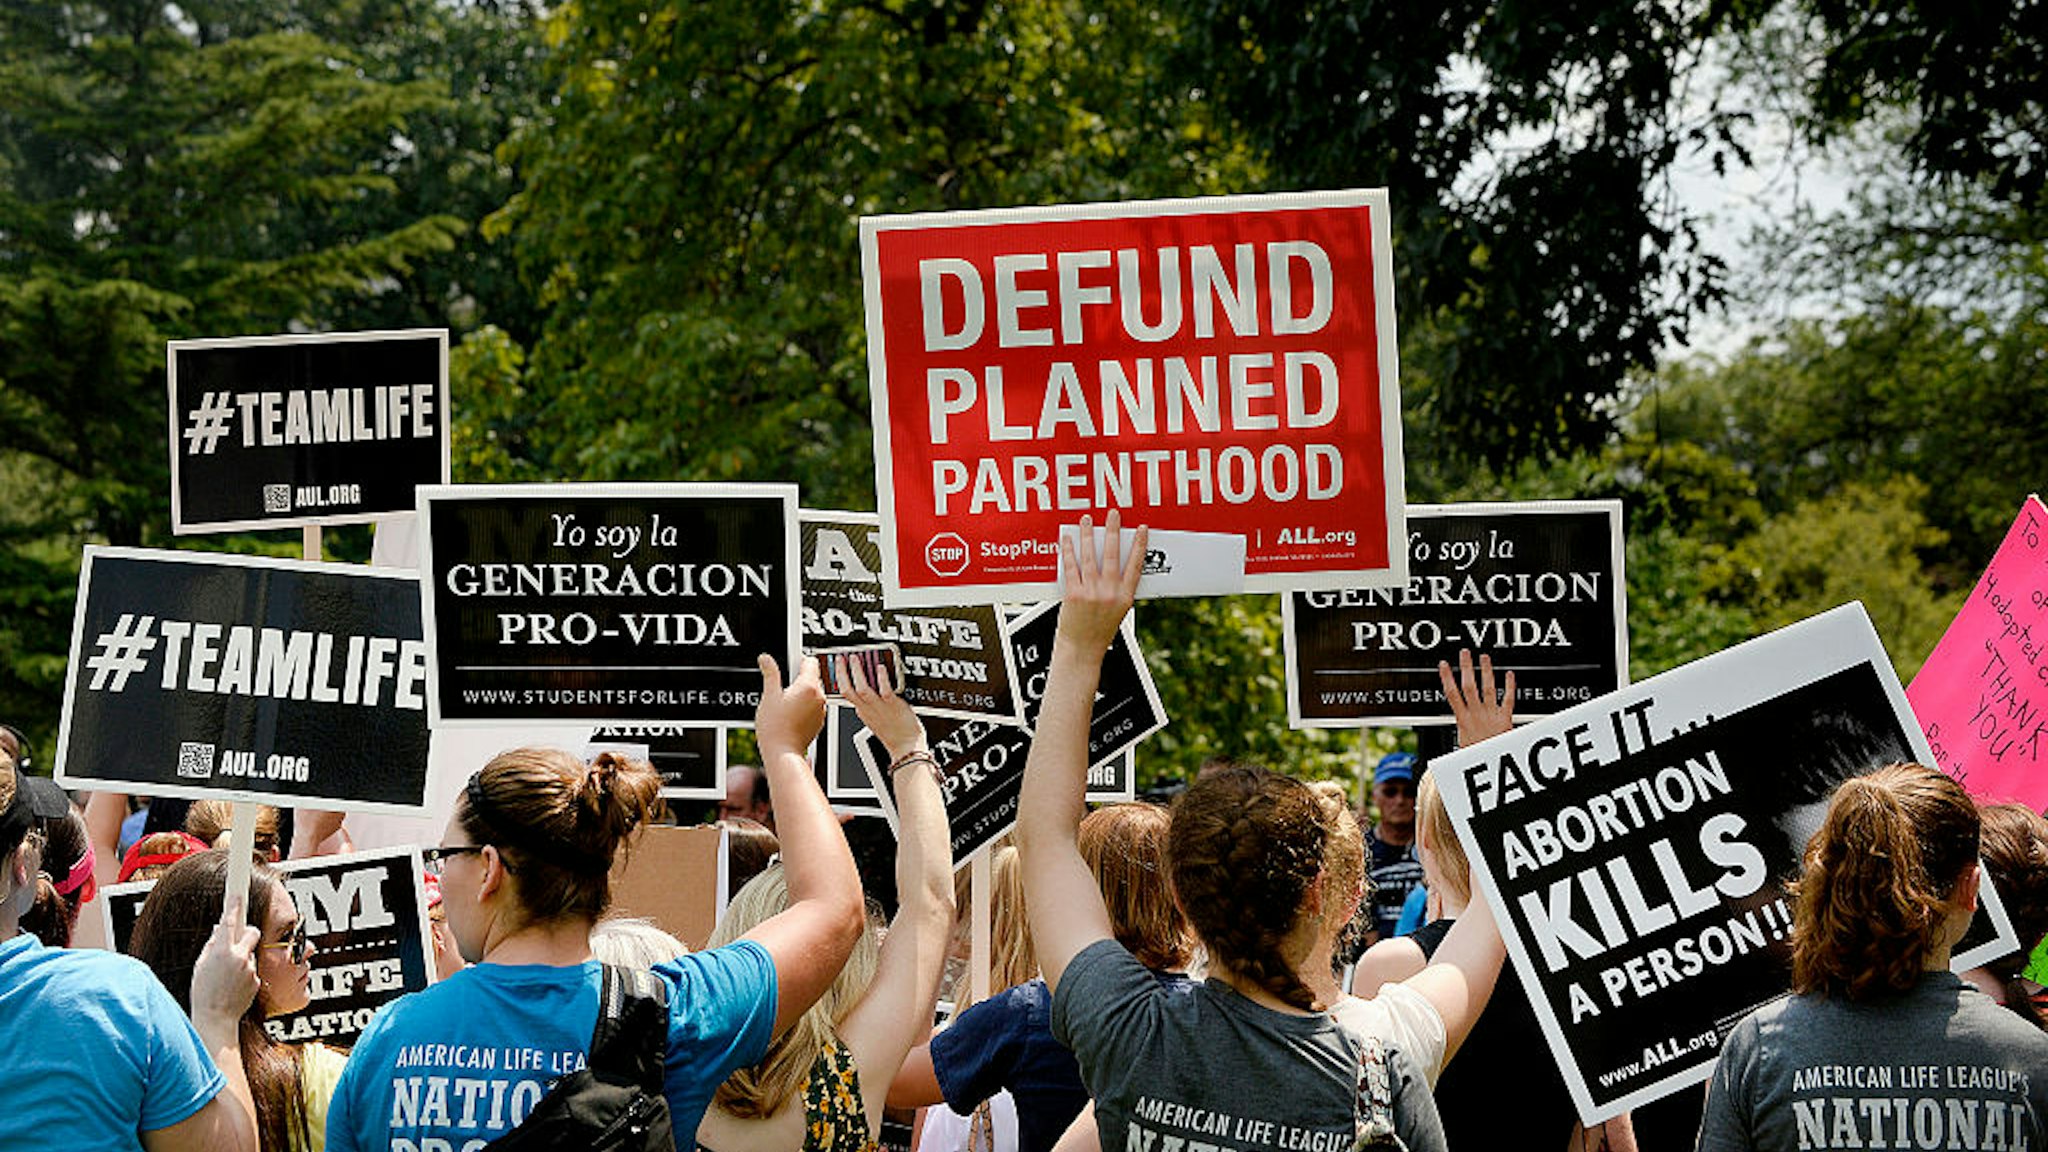 WASHINGTON, DC - JULY 28: Anti-abortion activists hold a rally opposing federal funding for Planned Parenthood in front of the U.S. Capitol on July 28, 2015 in Washington, DC. Sen. Rand Paul (R-KY) announced a Senate deal to vote on legislation to defund Planned Parenthood before the Senate goes into recess in August.